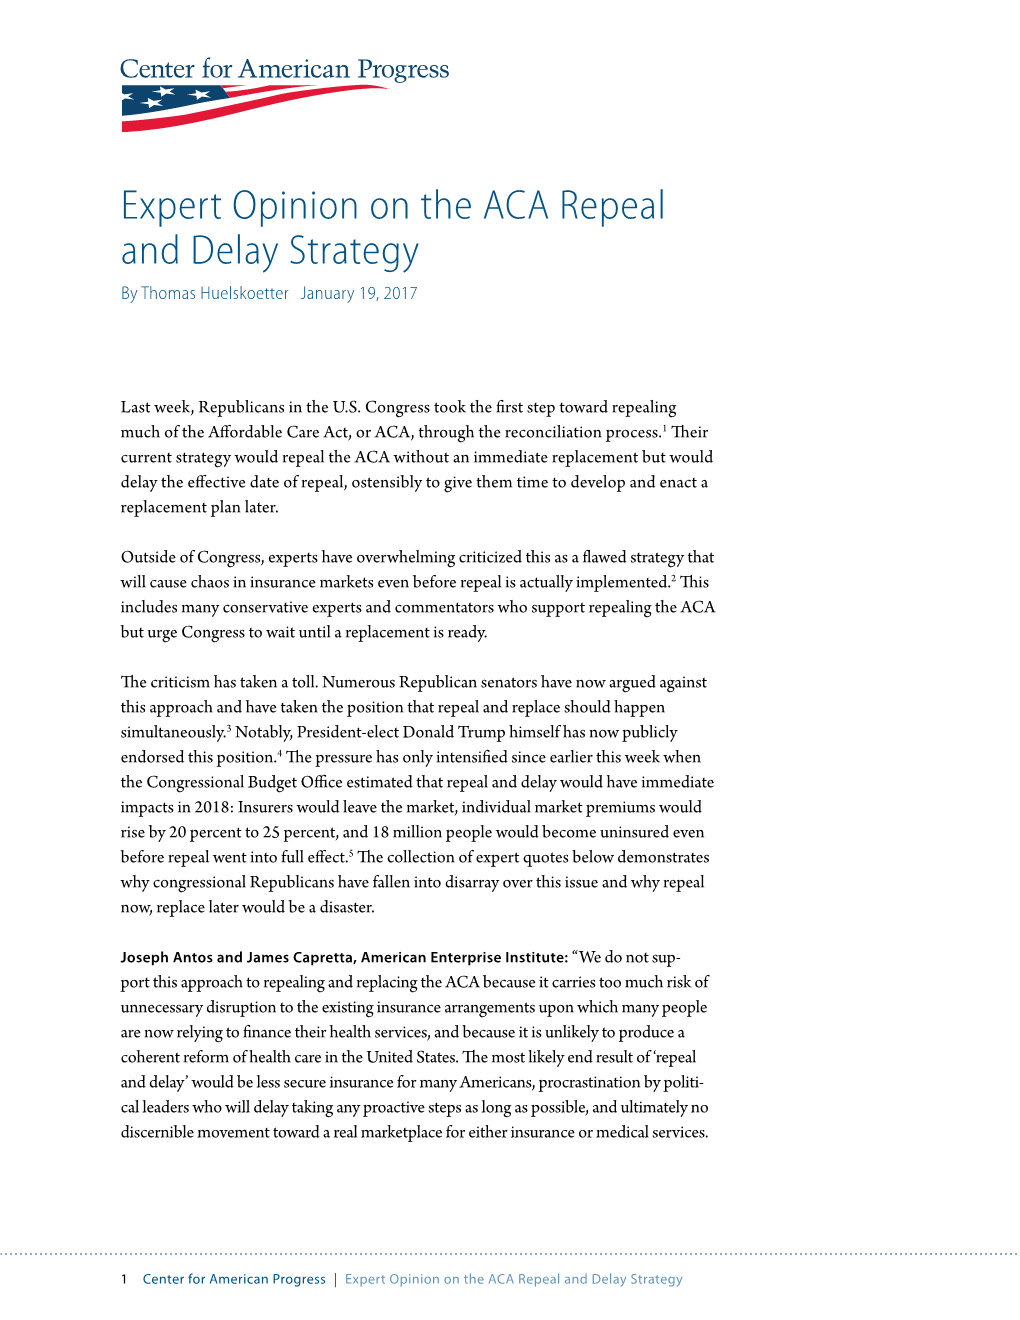 Expert Opinion on the ACA Repeal and Delay Strategy by Thomas Huelskoetter January 19, 2017